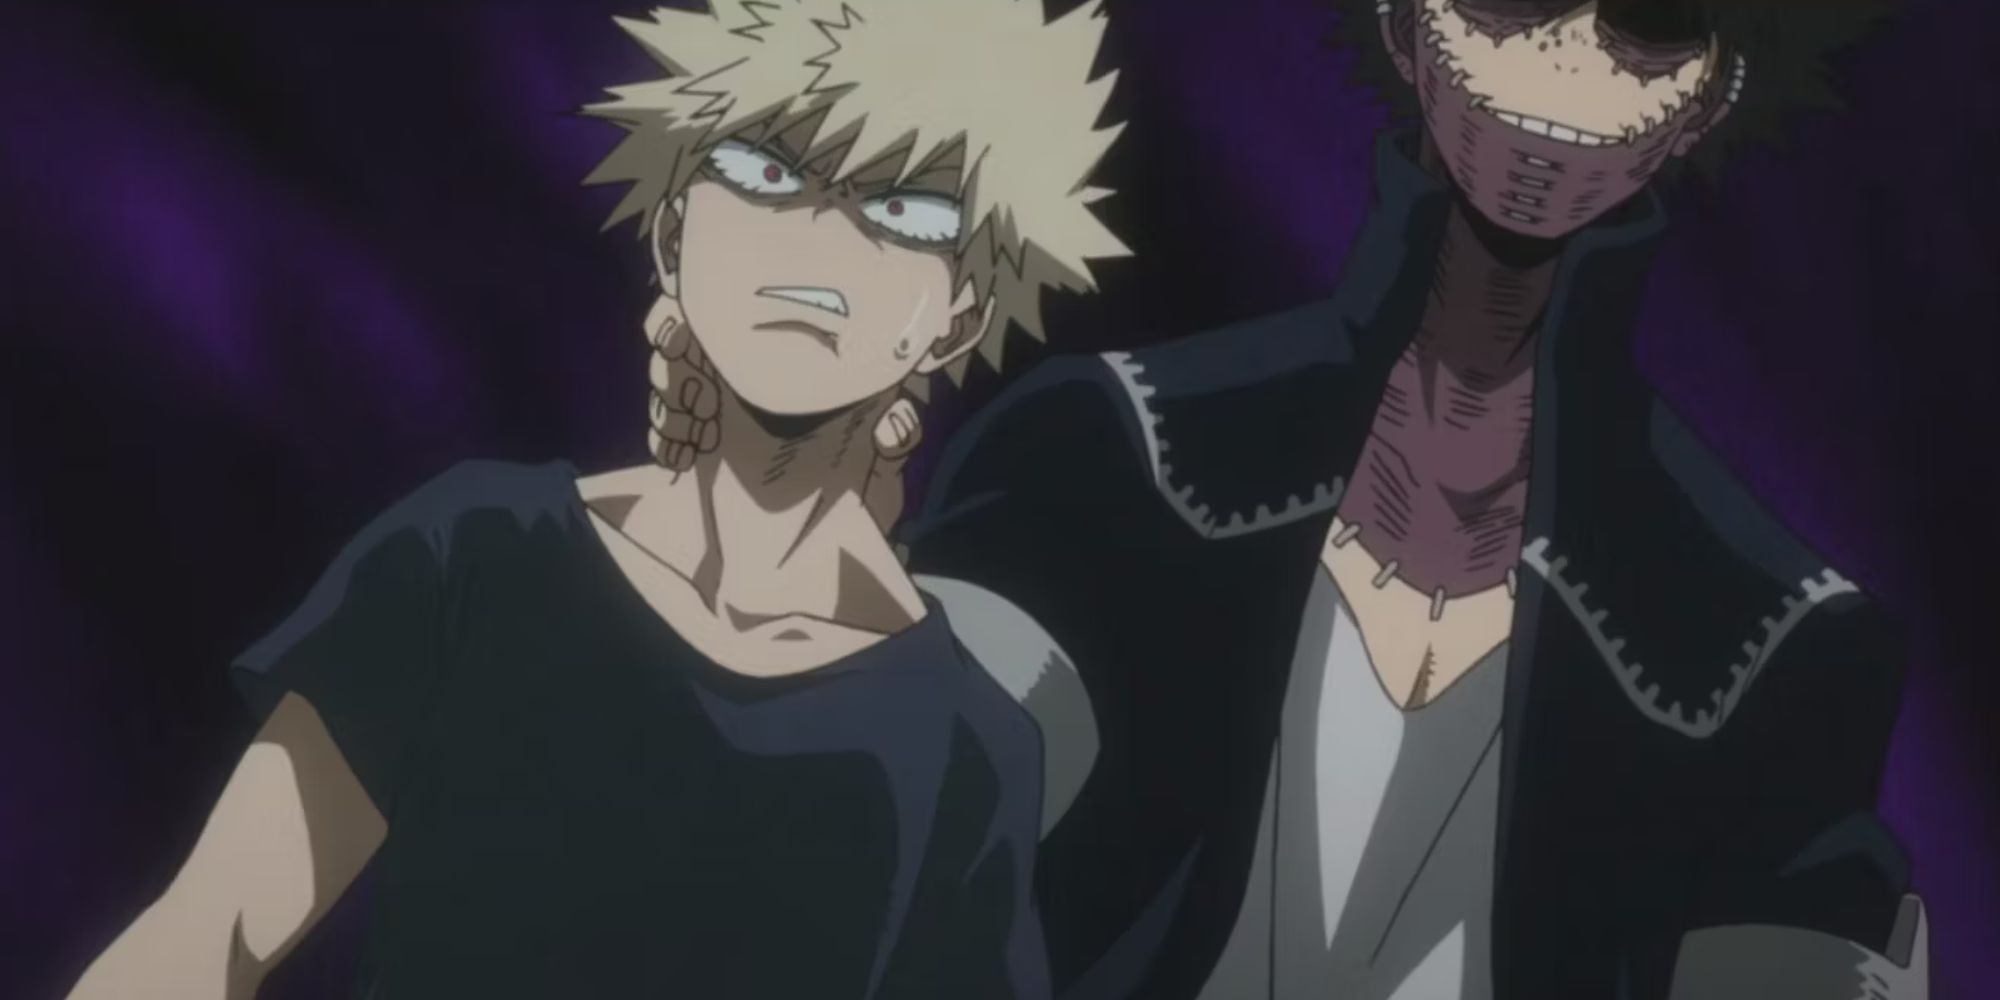 Dabi (and the rest of the LoV) succesfully kidnaps Bakugo.